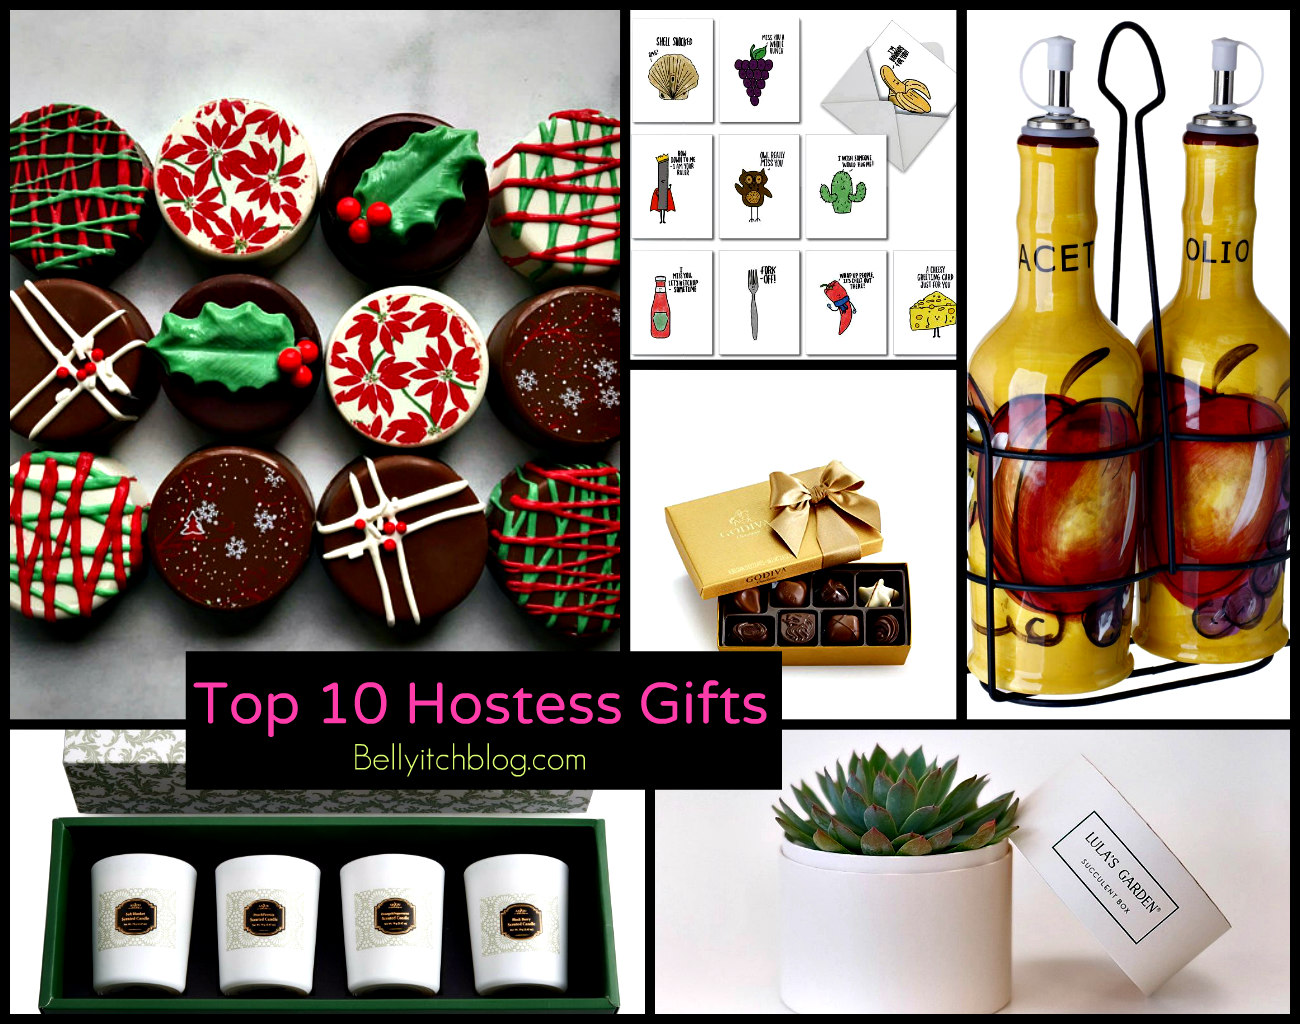 Get Last Minute Holiday Shopping Ideas with These Gift Guides